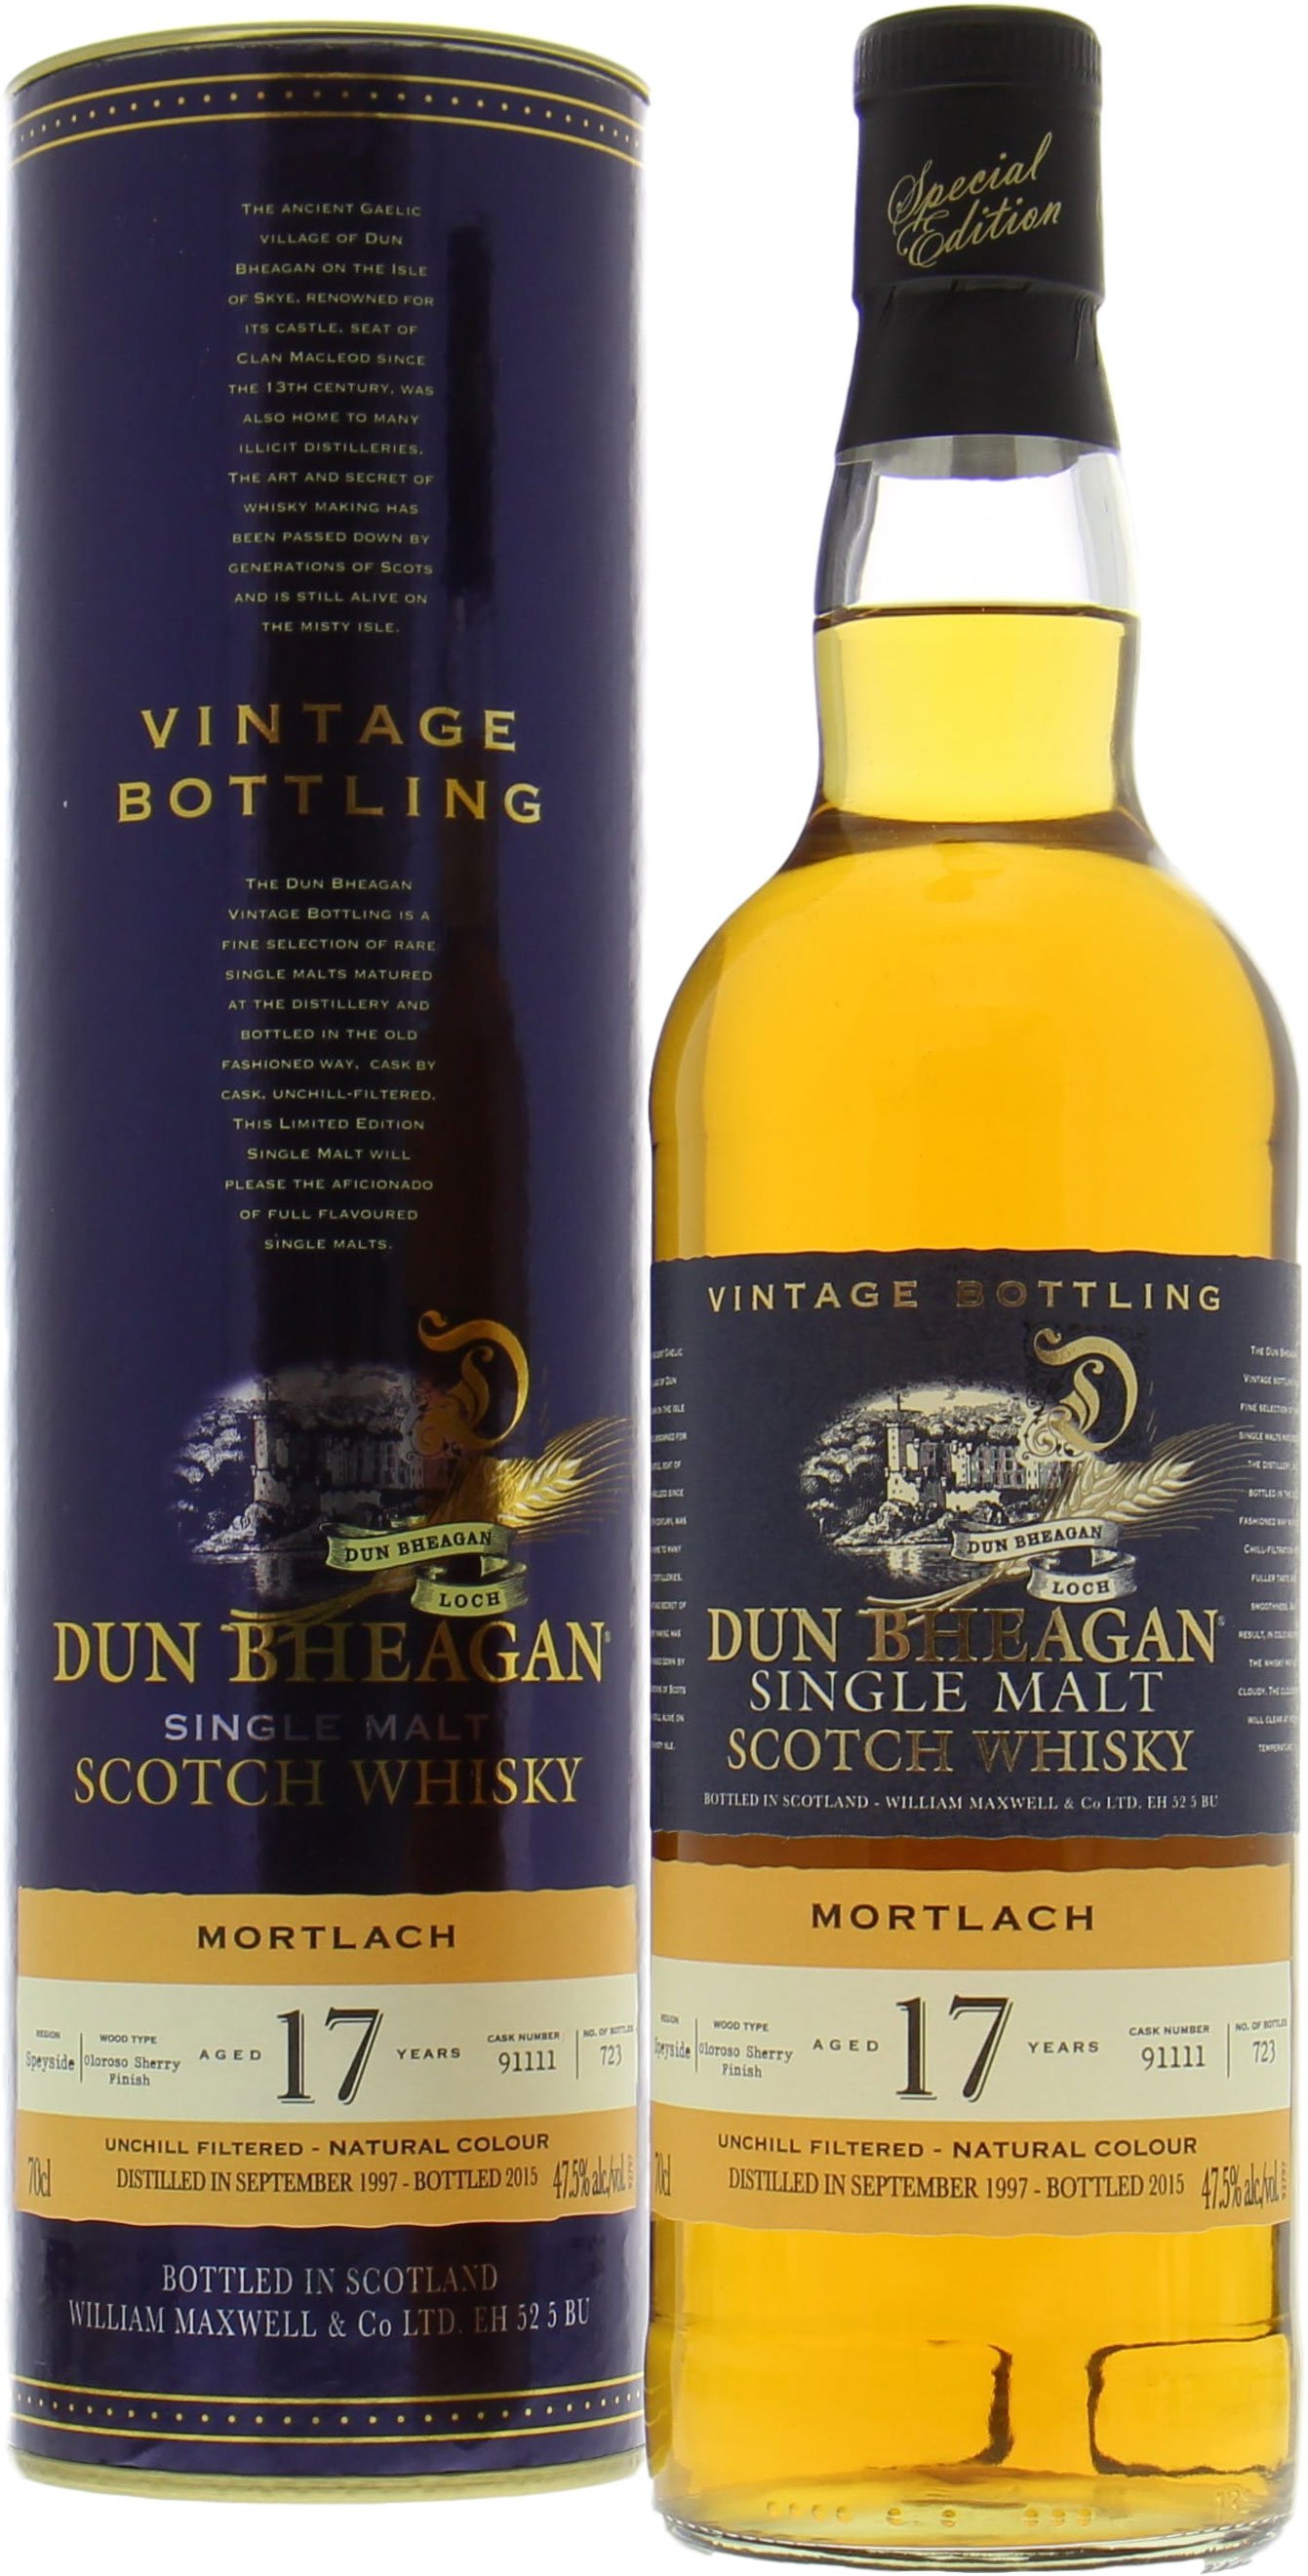 Mortlach - 17 Years Old Ian MacLeod Dun Bheagan Cask 91111  47.5% 1997 In Original Container